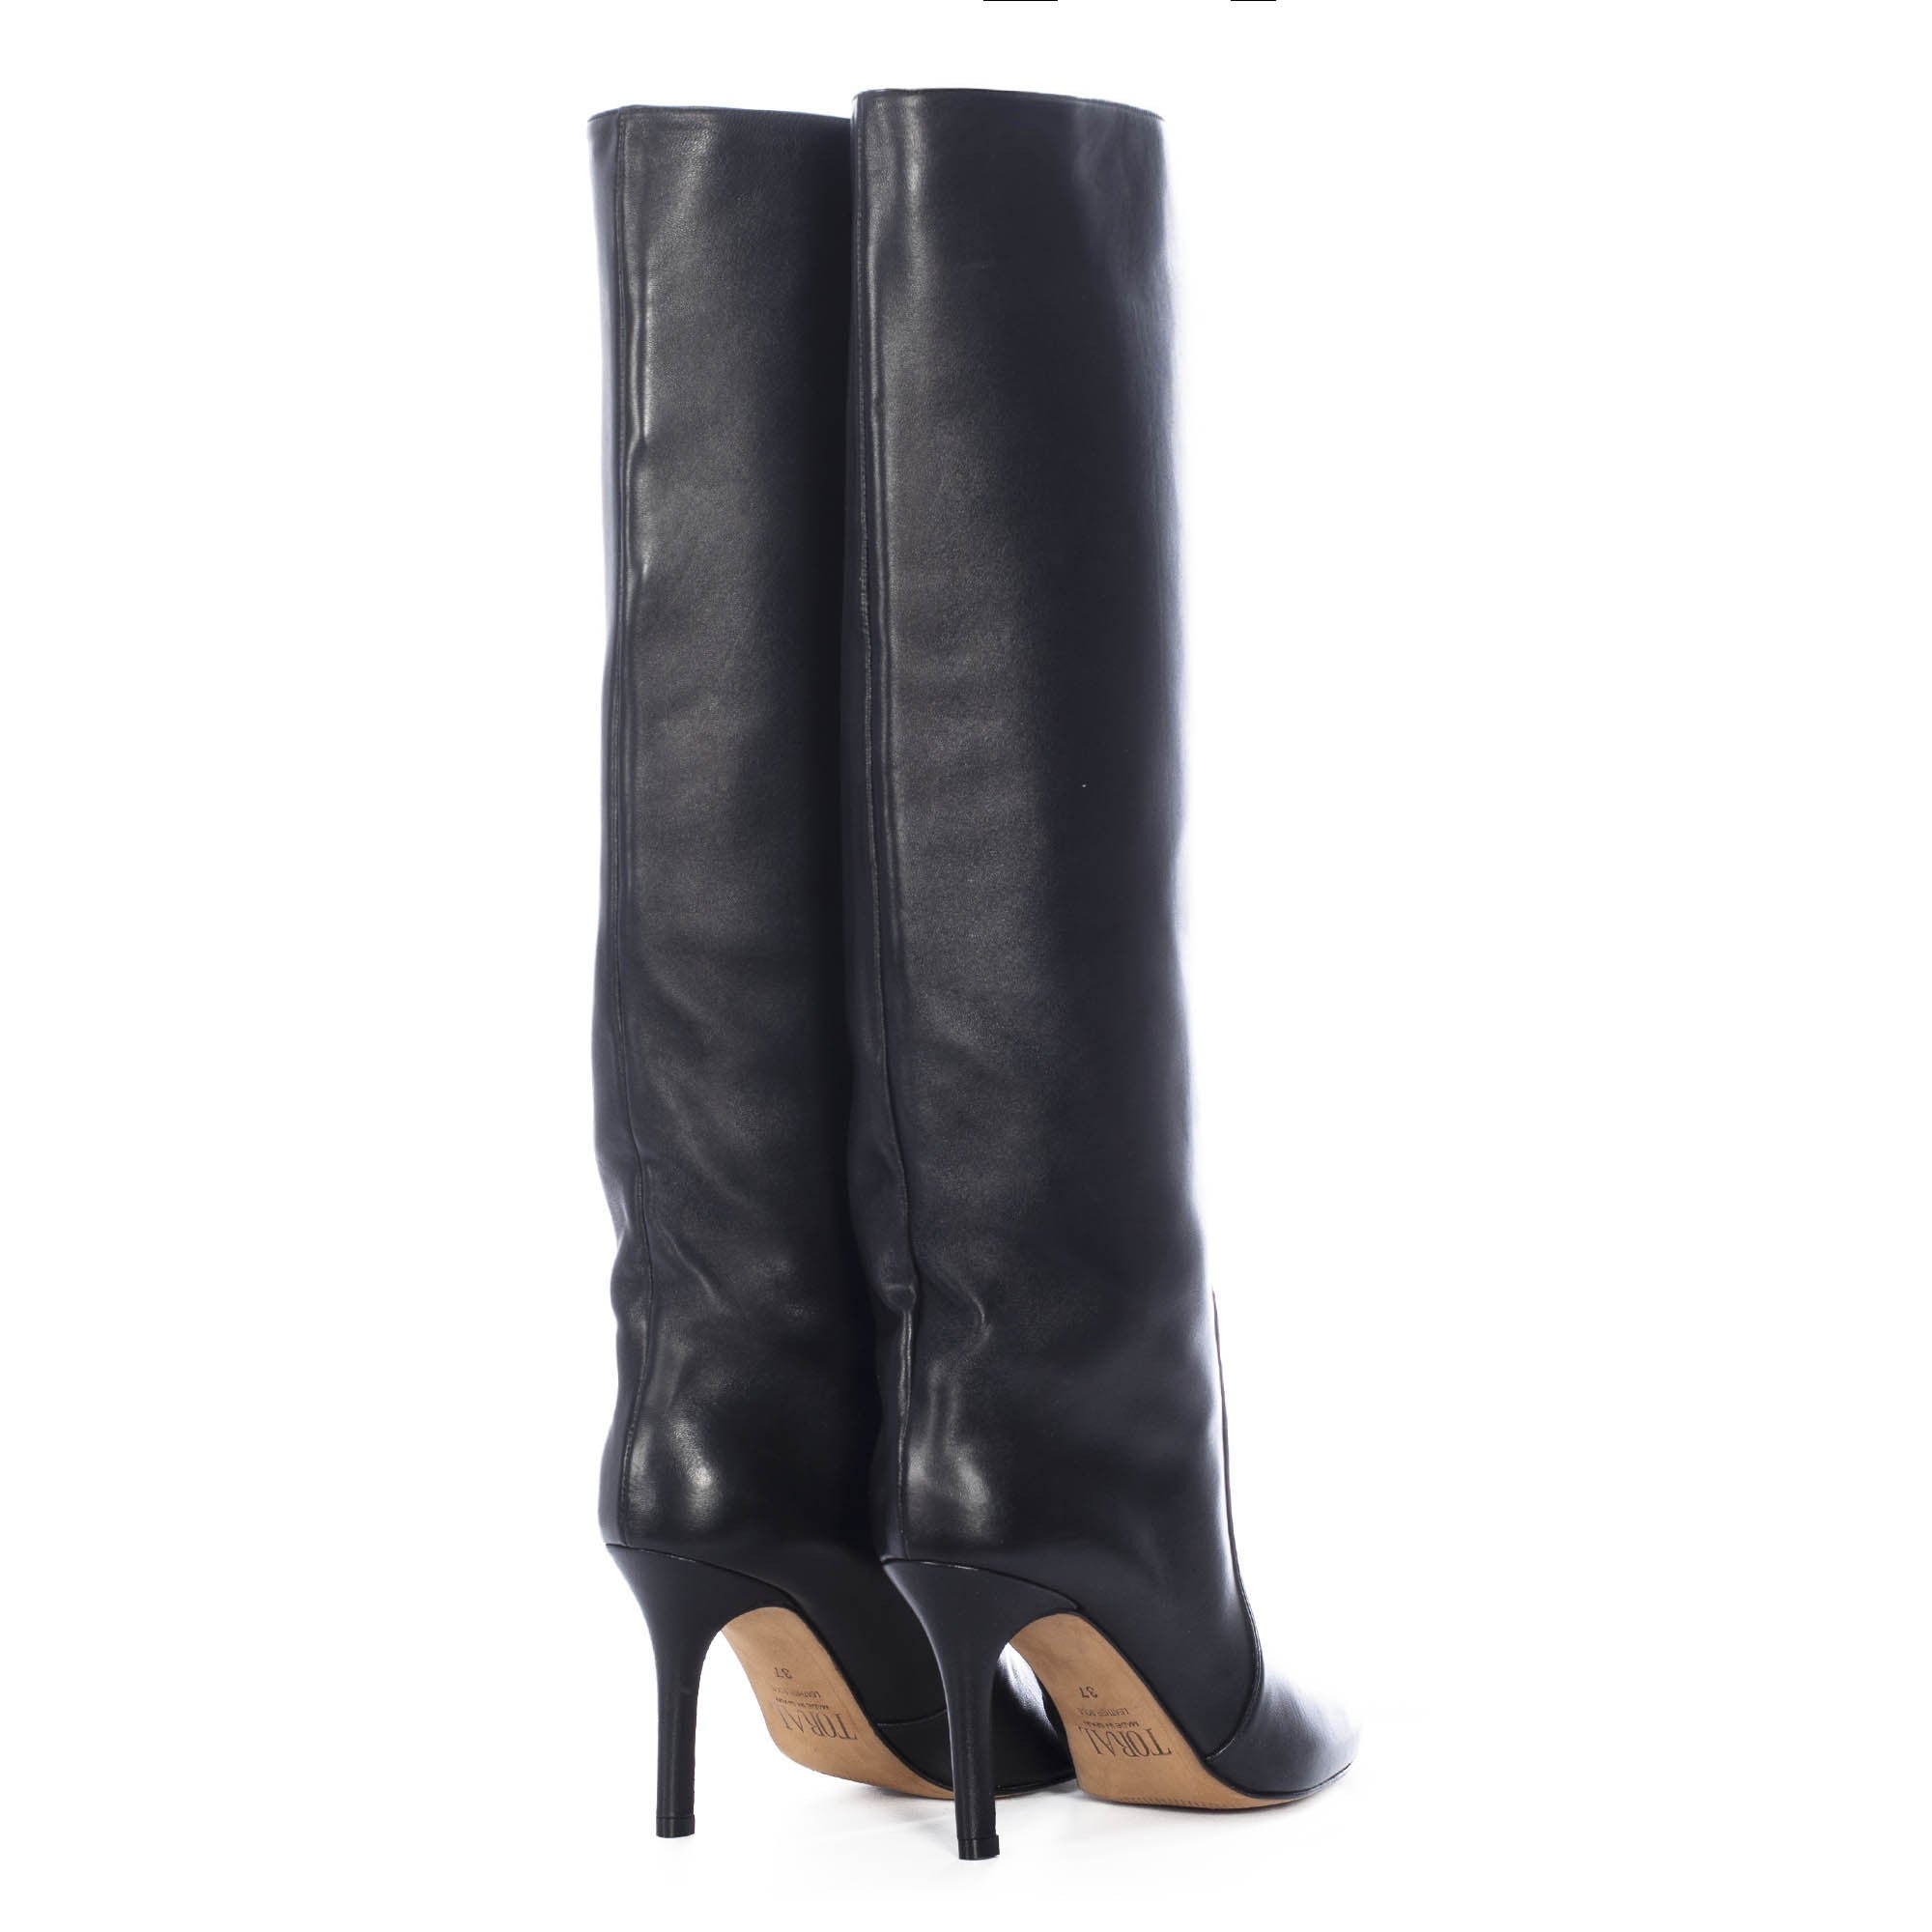 TORAL BLACK LEATHER KNEE-HIGH BOOTS (6947996336268)